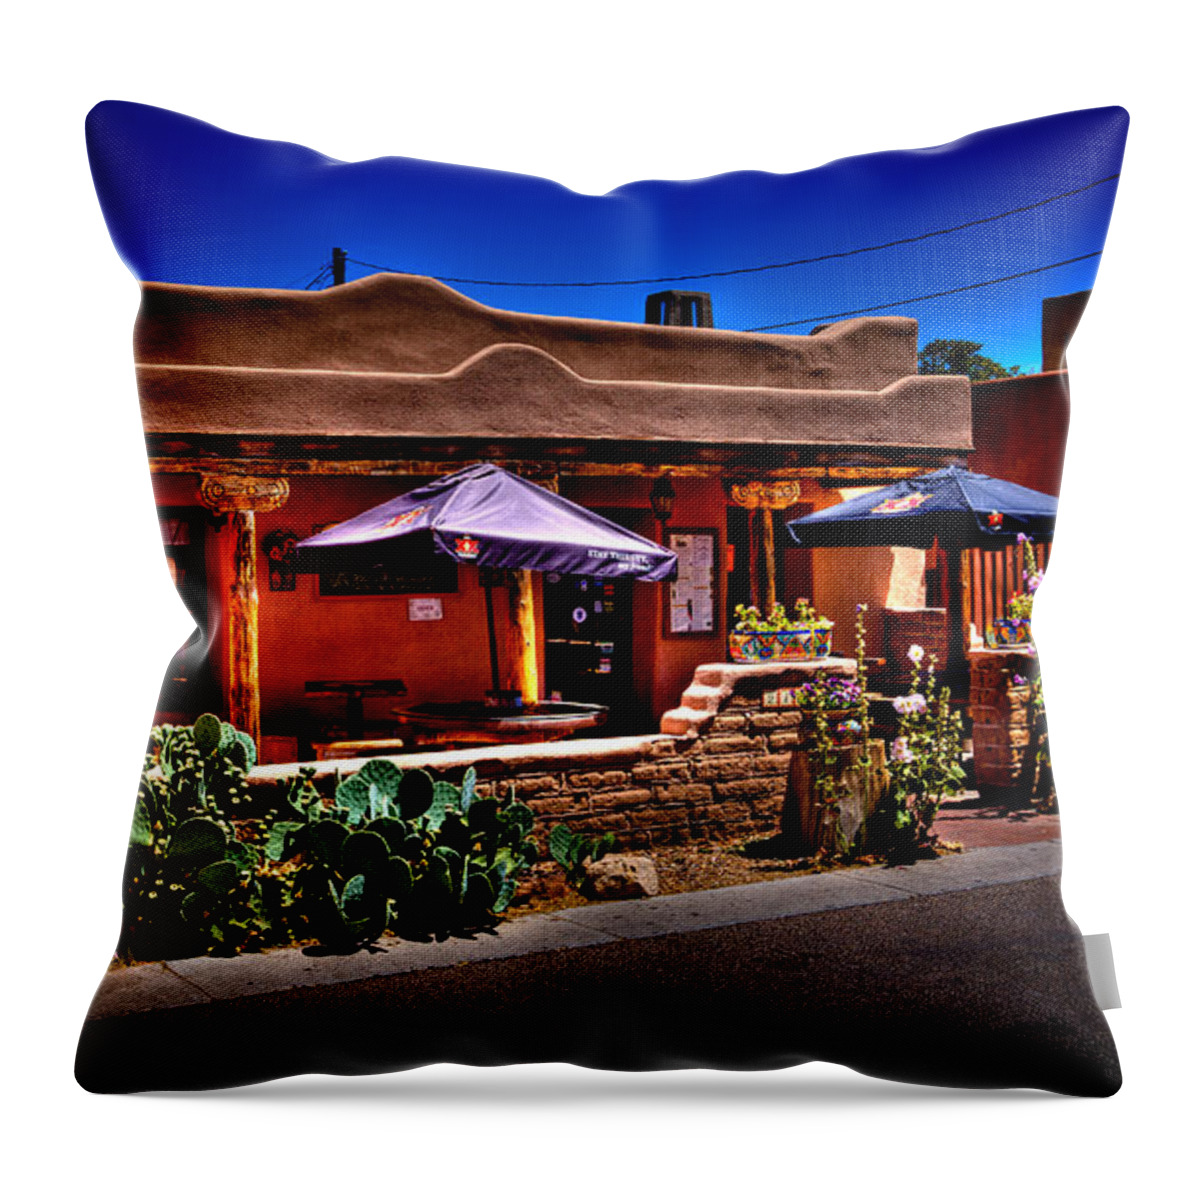 The Church Street Cafe Throw Pillow featuring the photograph The Church Street Cafe - Albuquerque New Mexico by David Patterson